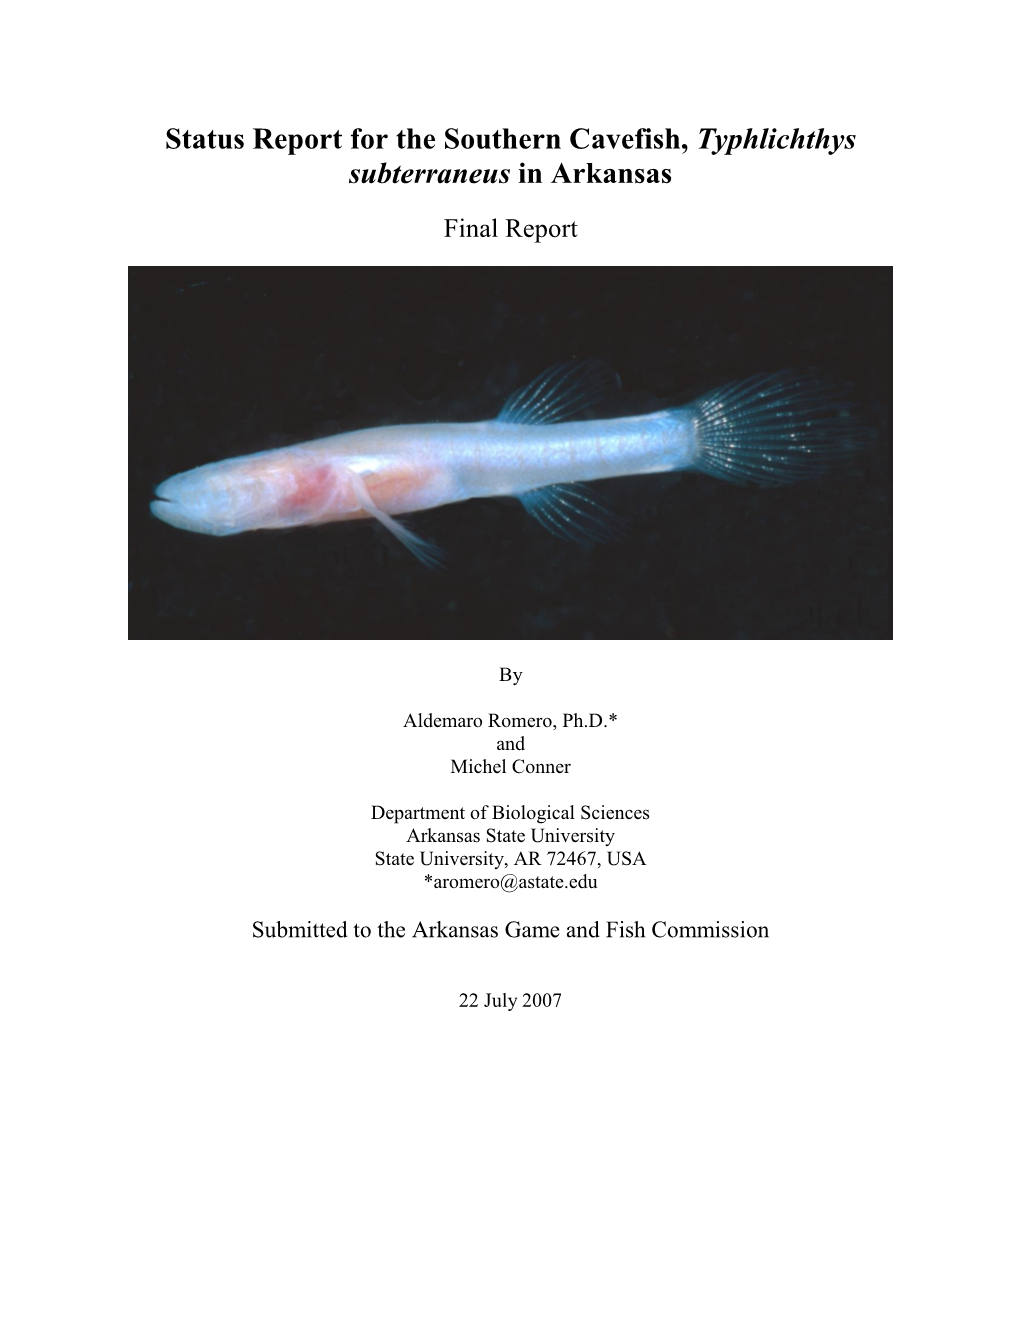 Proposal on Status Report for the Southern Cavefish, Typhlichthys